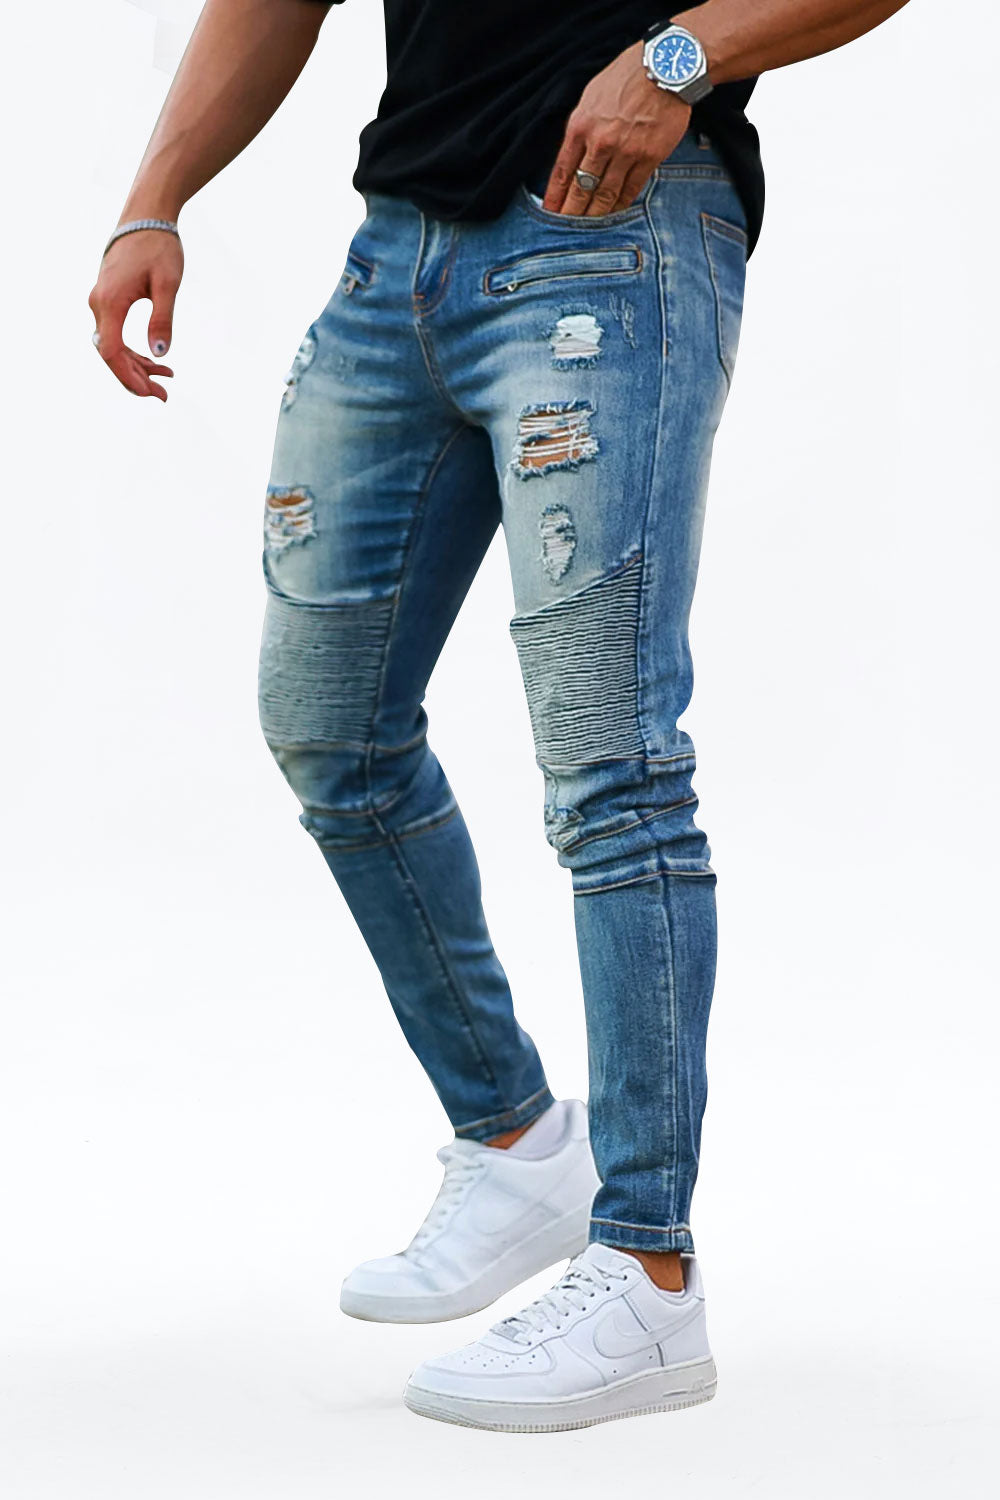 Gingtto Mens Vintage Washed Ripped Casual Jeans Stretch Jeans